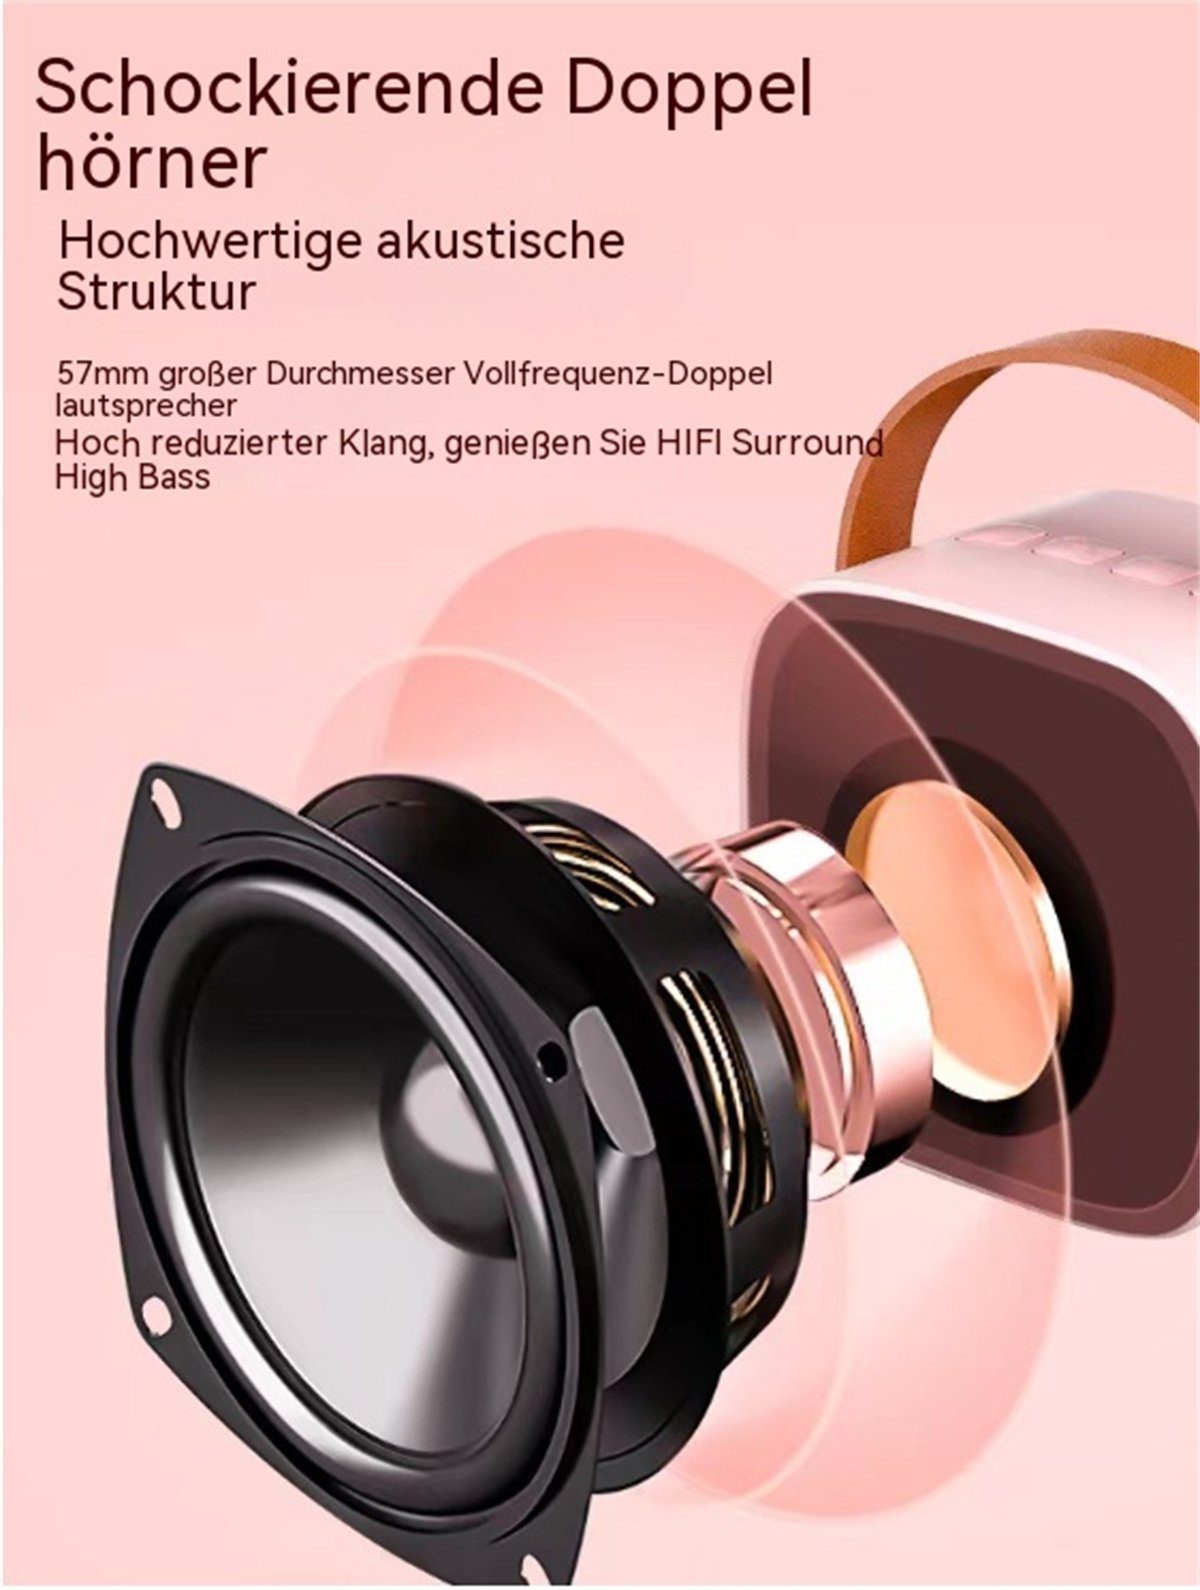 2 (Bluetooth, Rosa Tragbares Bluetooth-Lautsprecher Mini-Lautsprecher-Mikrofon-Set Mikrofone) W, carefully 6 selected